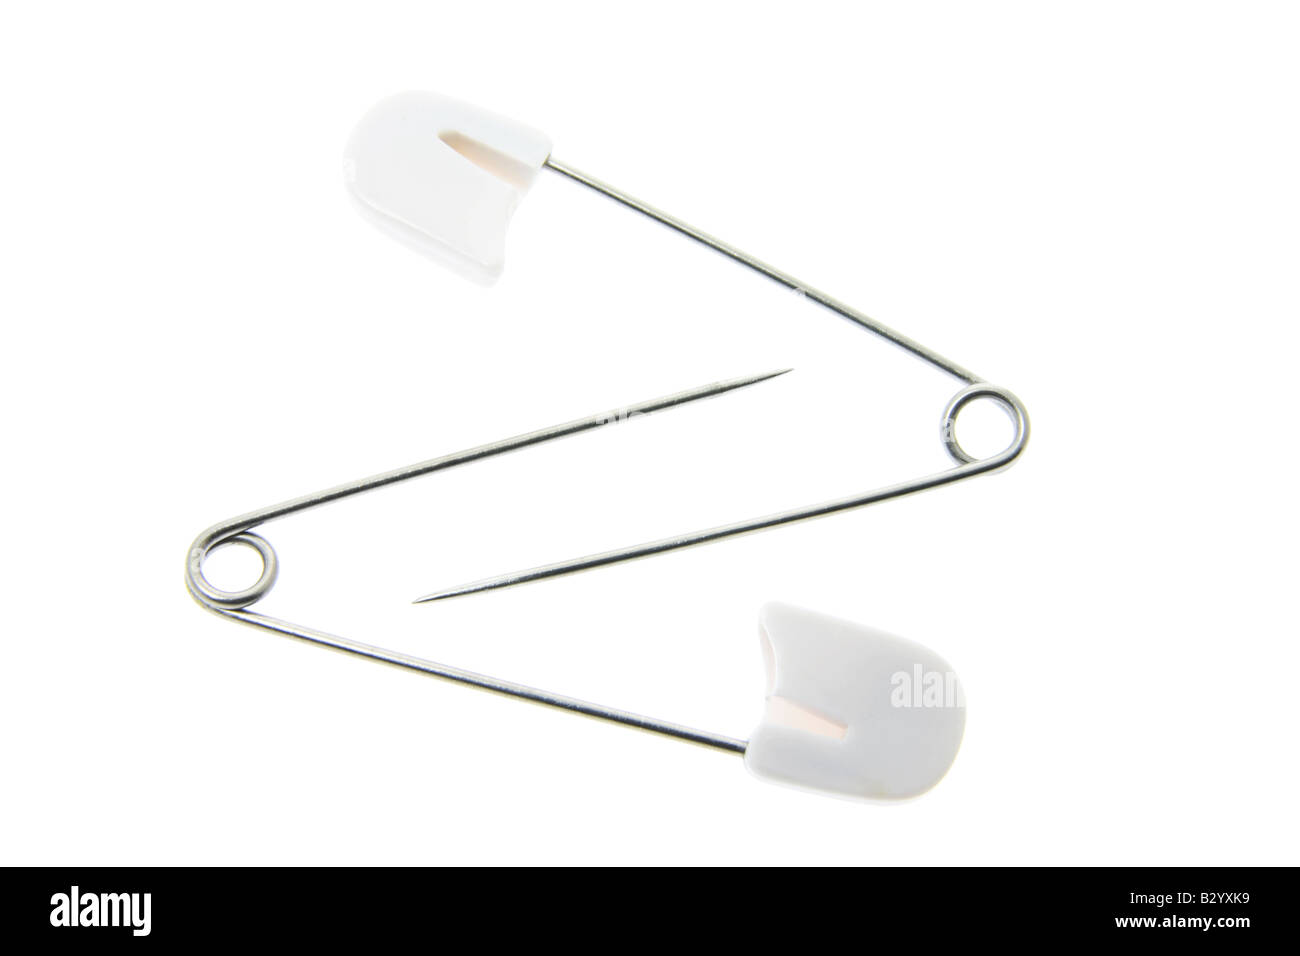 Safety Pins Stock Photo